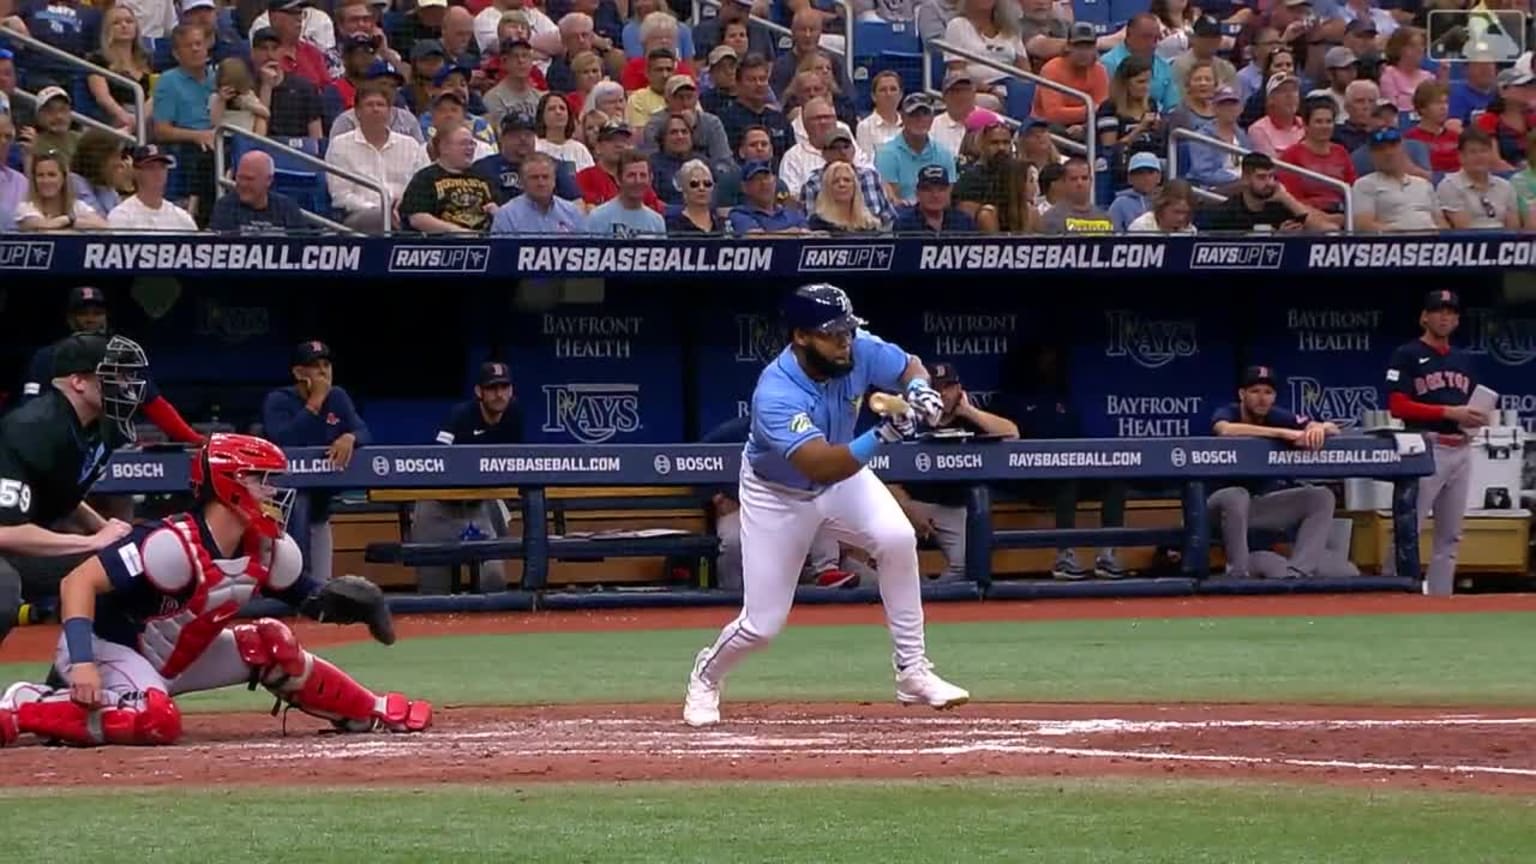 Raymond the Rays Mascot responded to the Yankees Hitting the Batters : r/ baseball